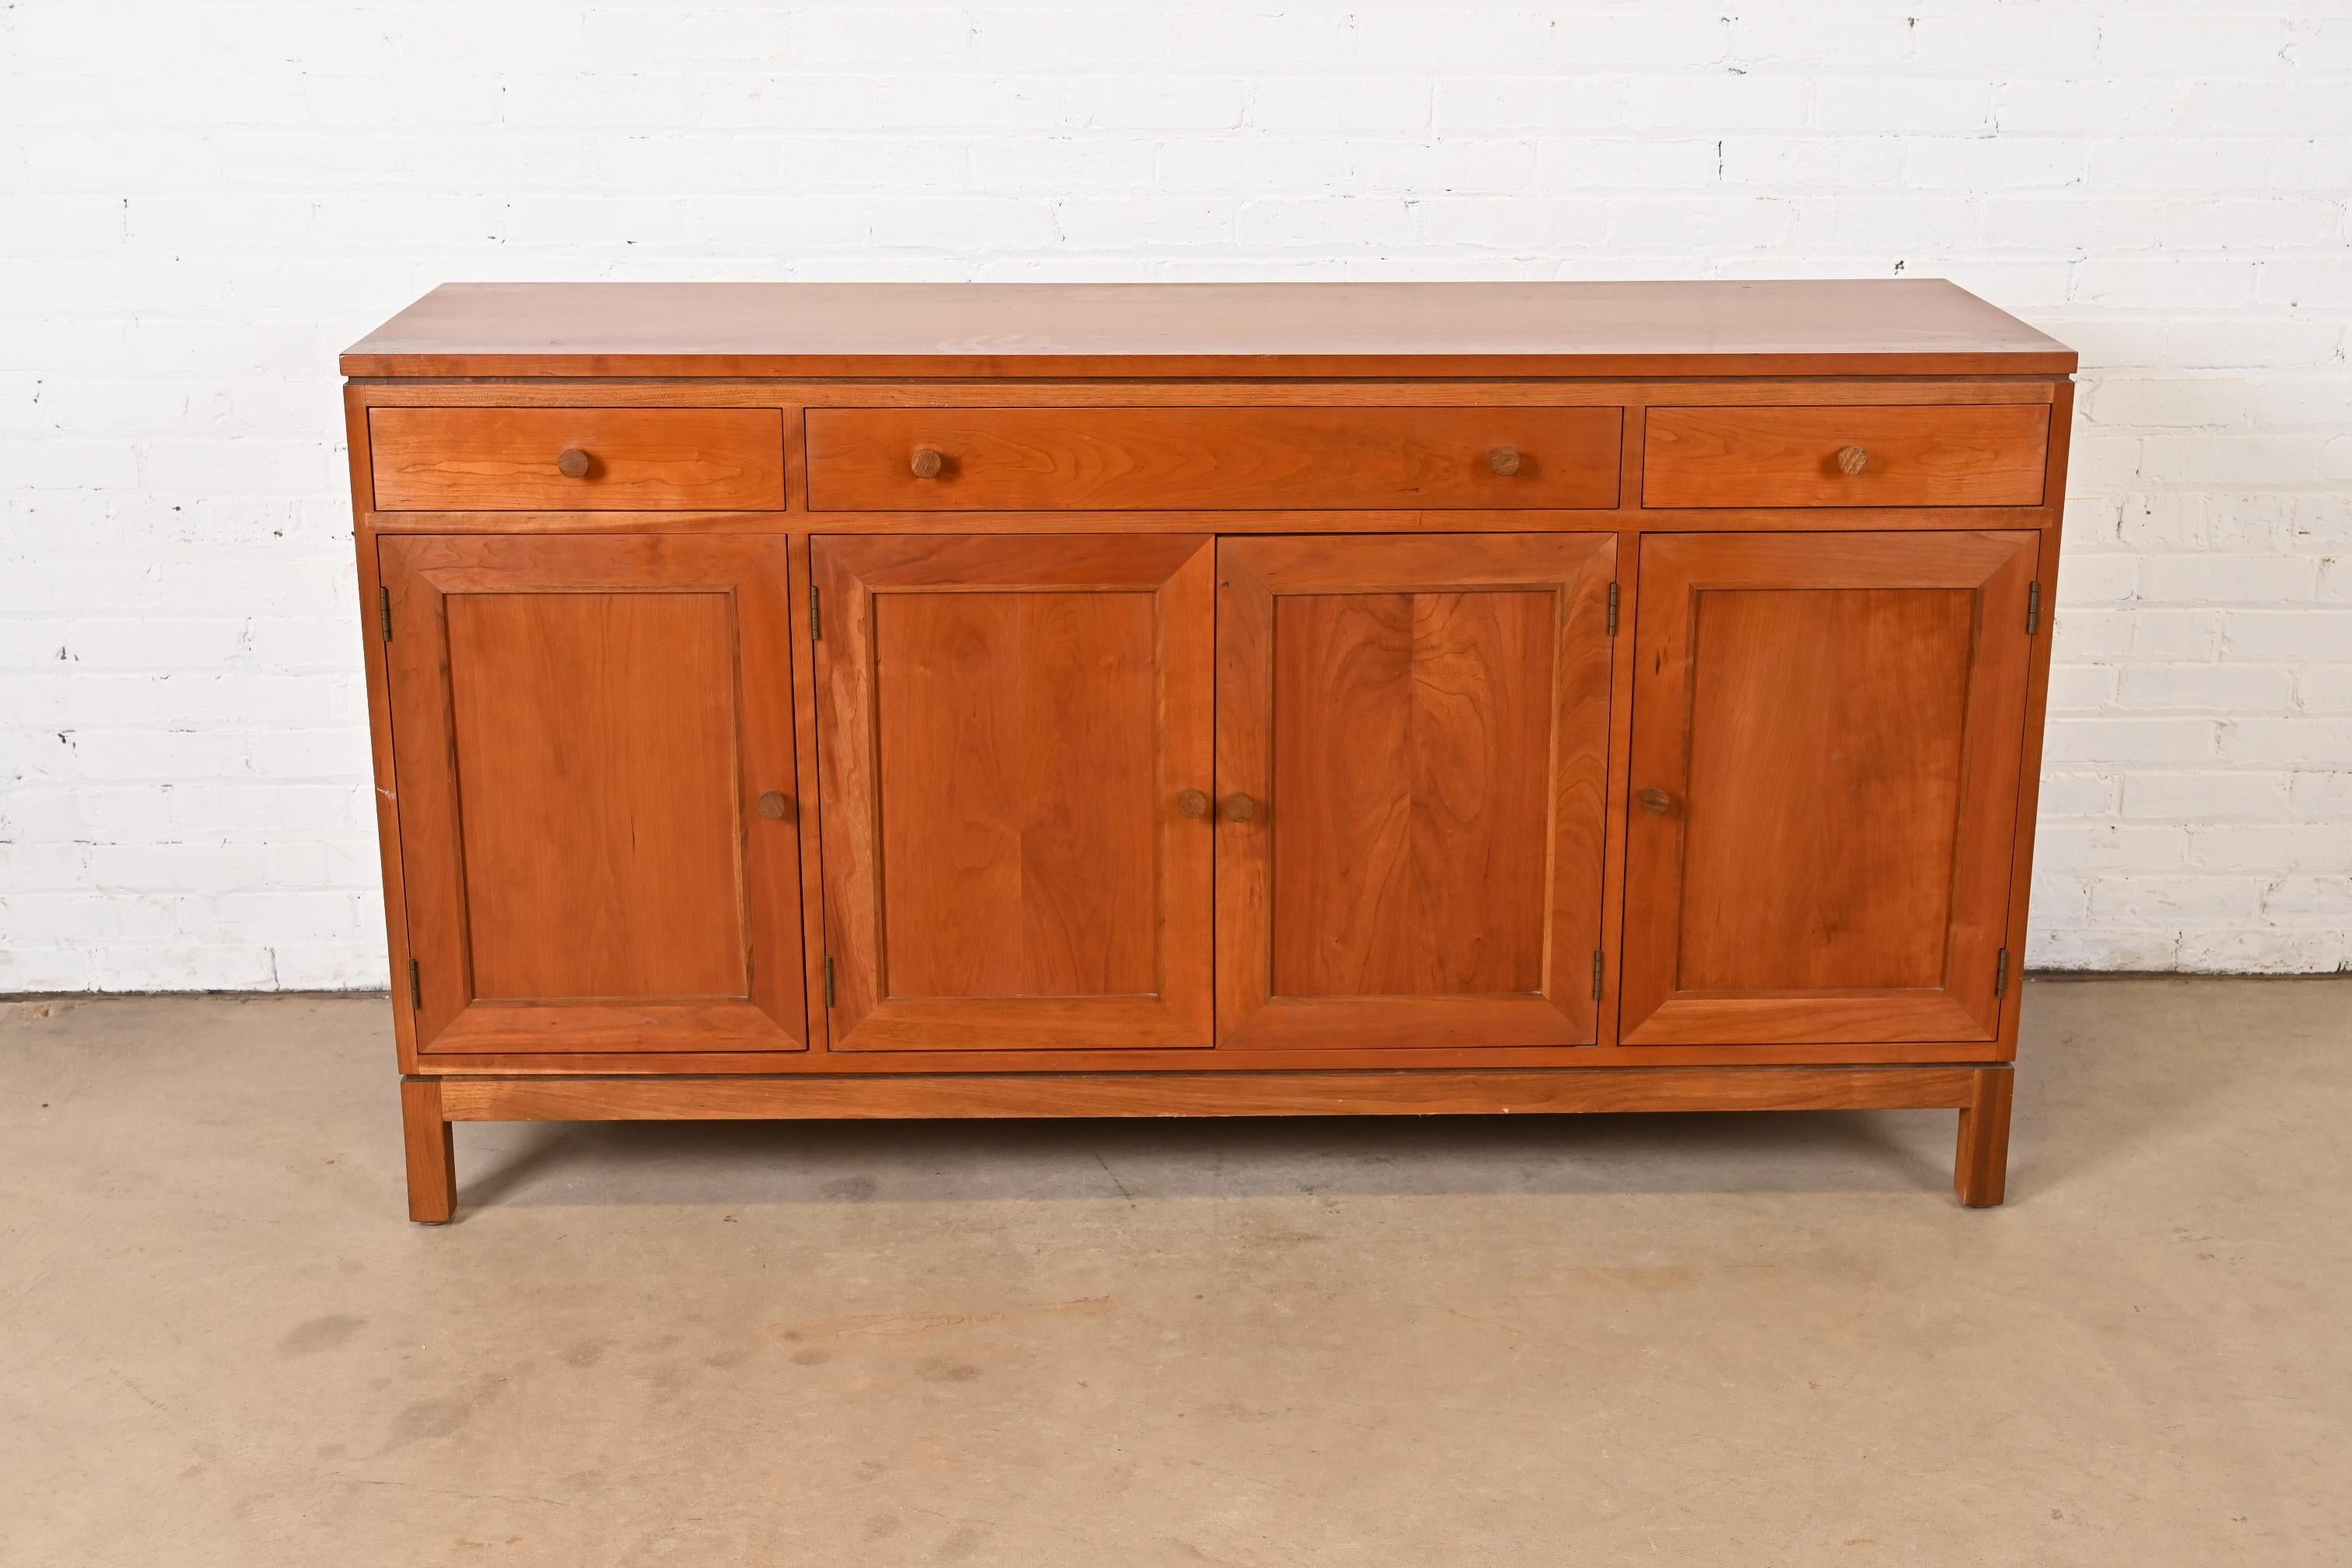 A gorgeous Arts & Crafts or Shaker style cherry wood sideboard, credenza, or bar cabinet

By Stickley

USA, Circa Late 20th Century

Measures: 64.25